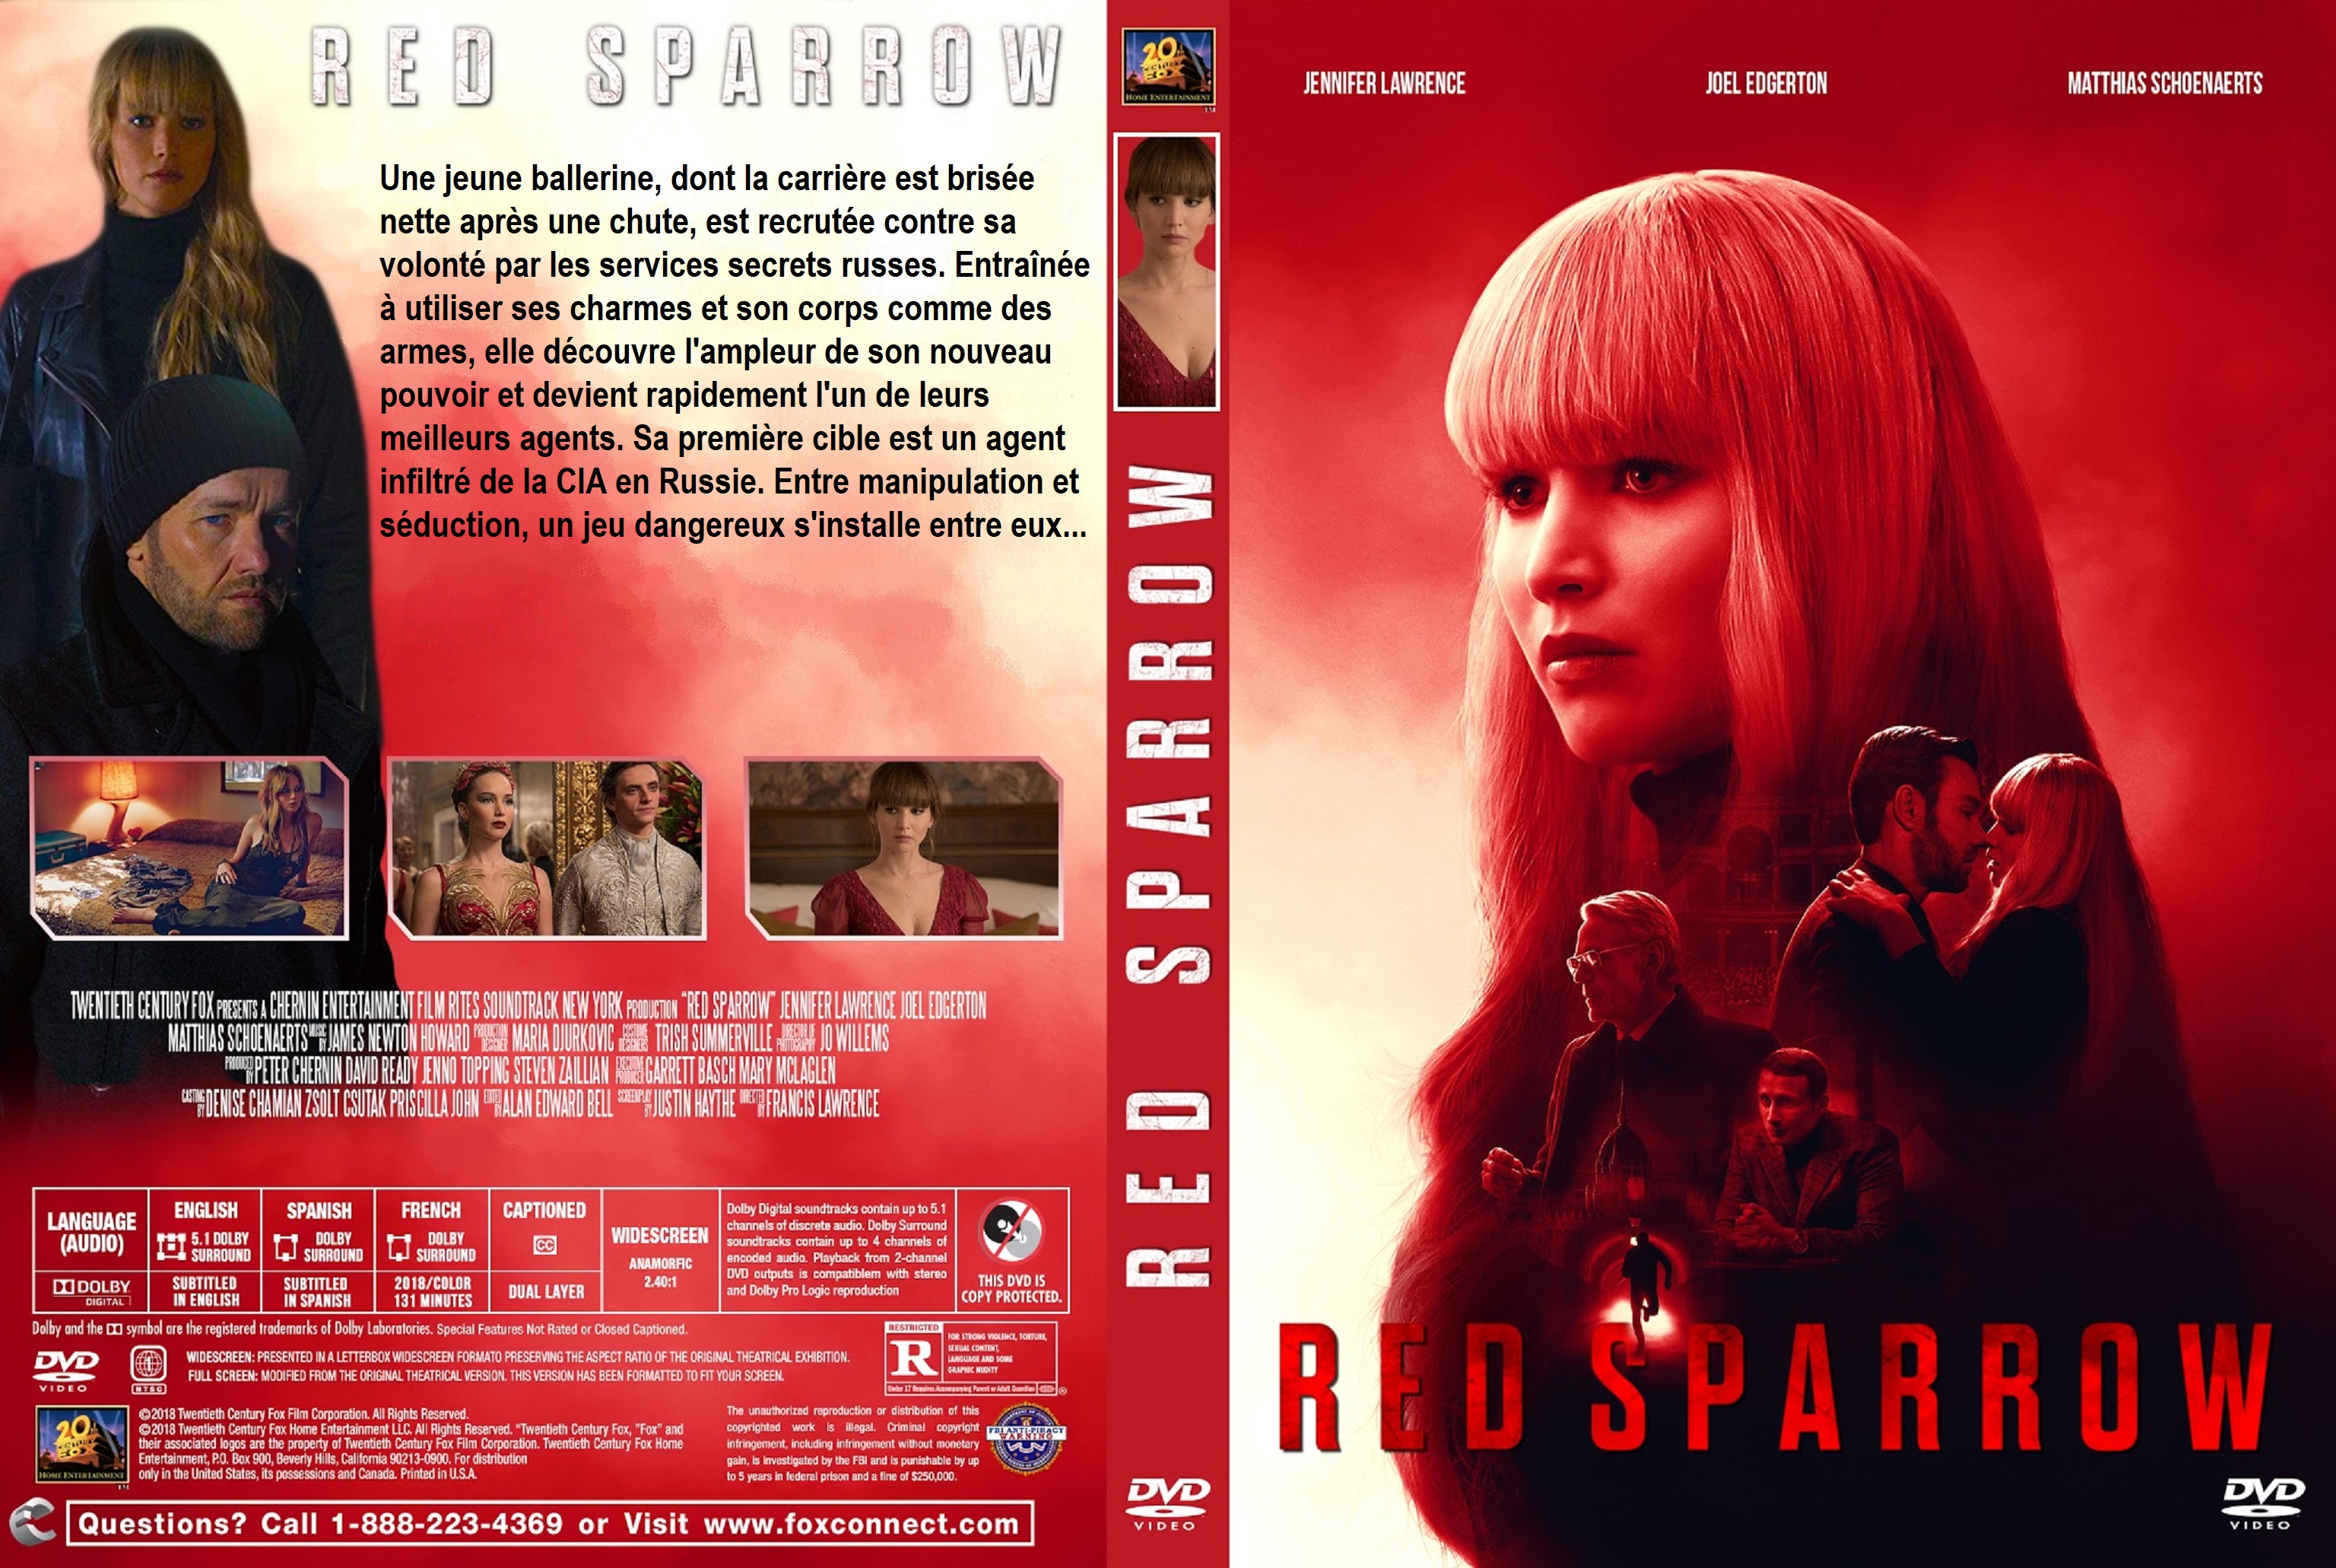 Jaquette DVD Red Sparrow custom